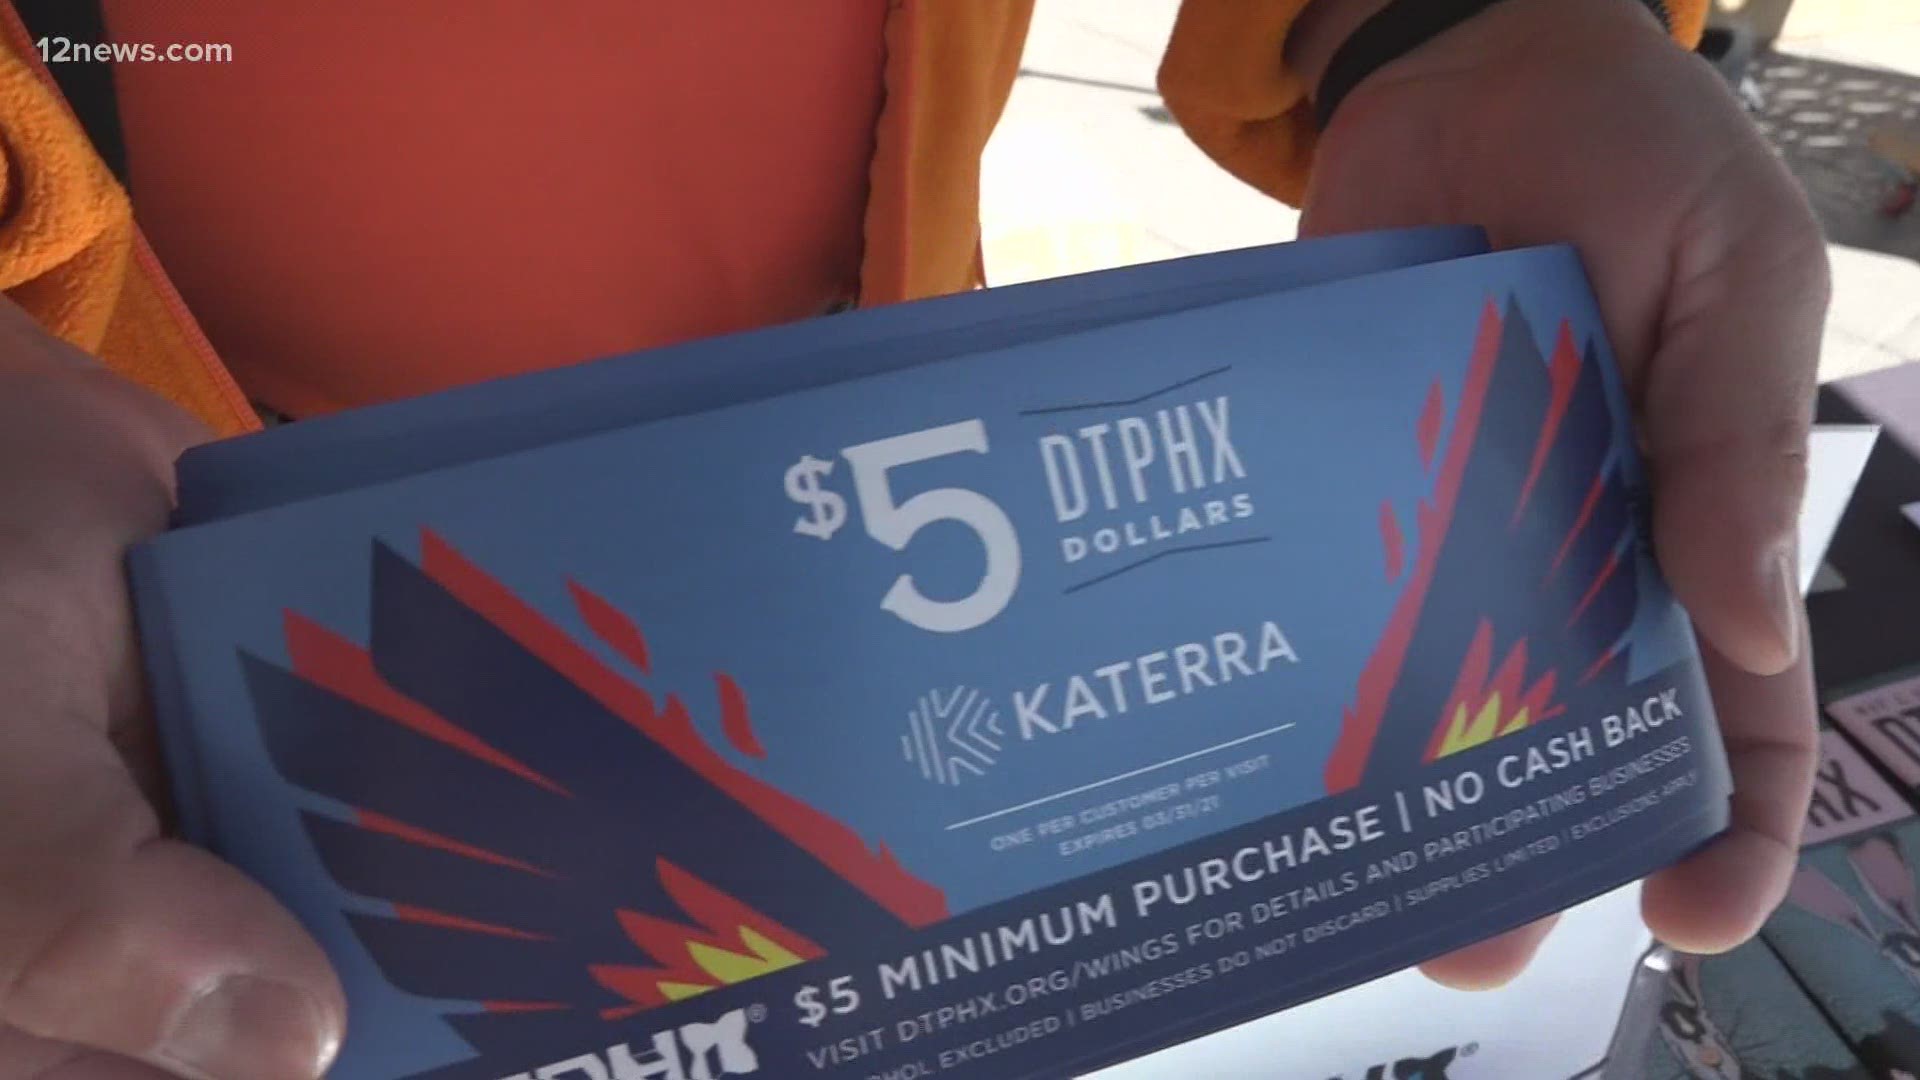 Downtown Phoenix Inc. is passing out $5 vouchers to spend downtown and help businesses struggling in the pandemic.